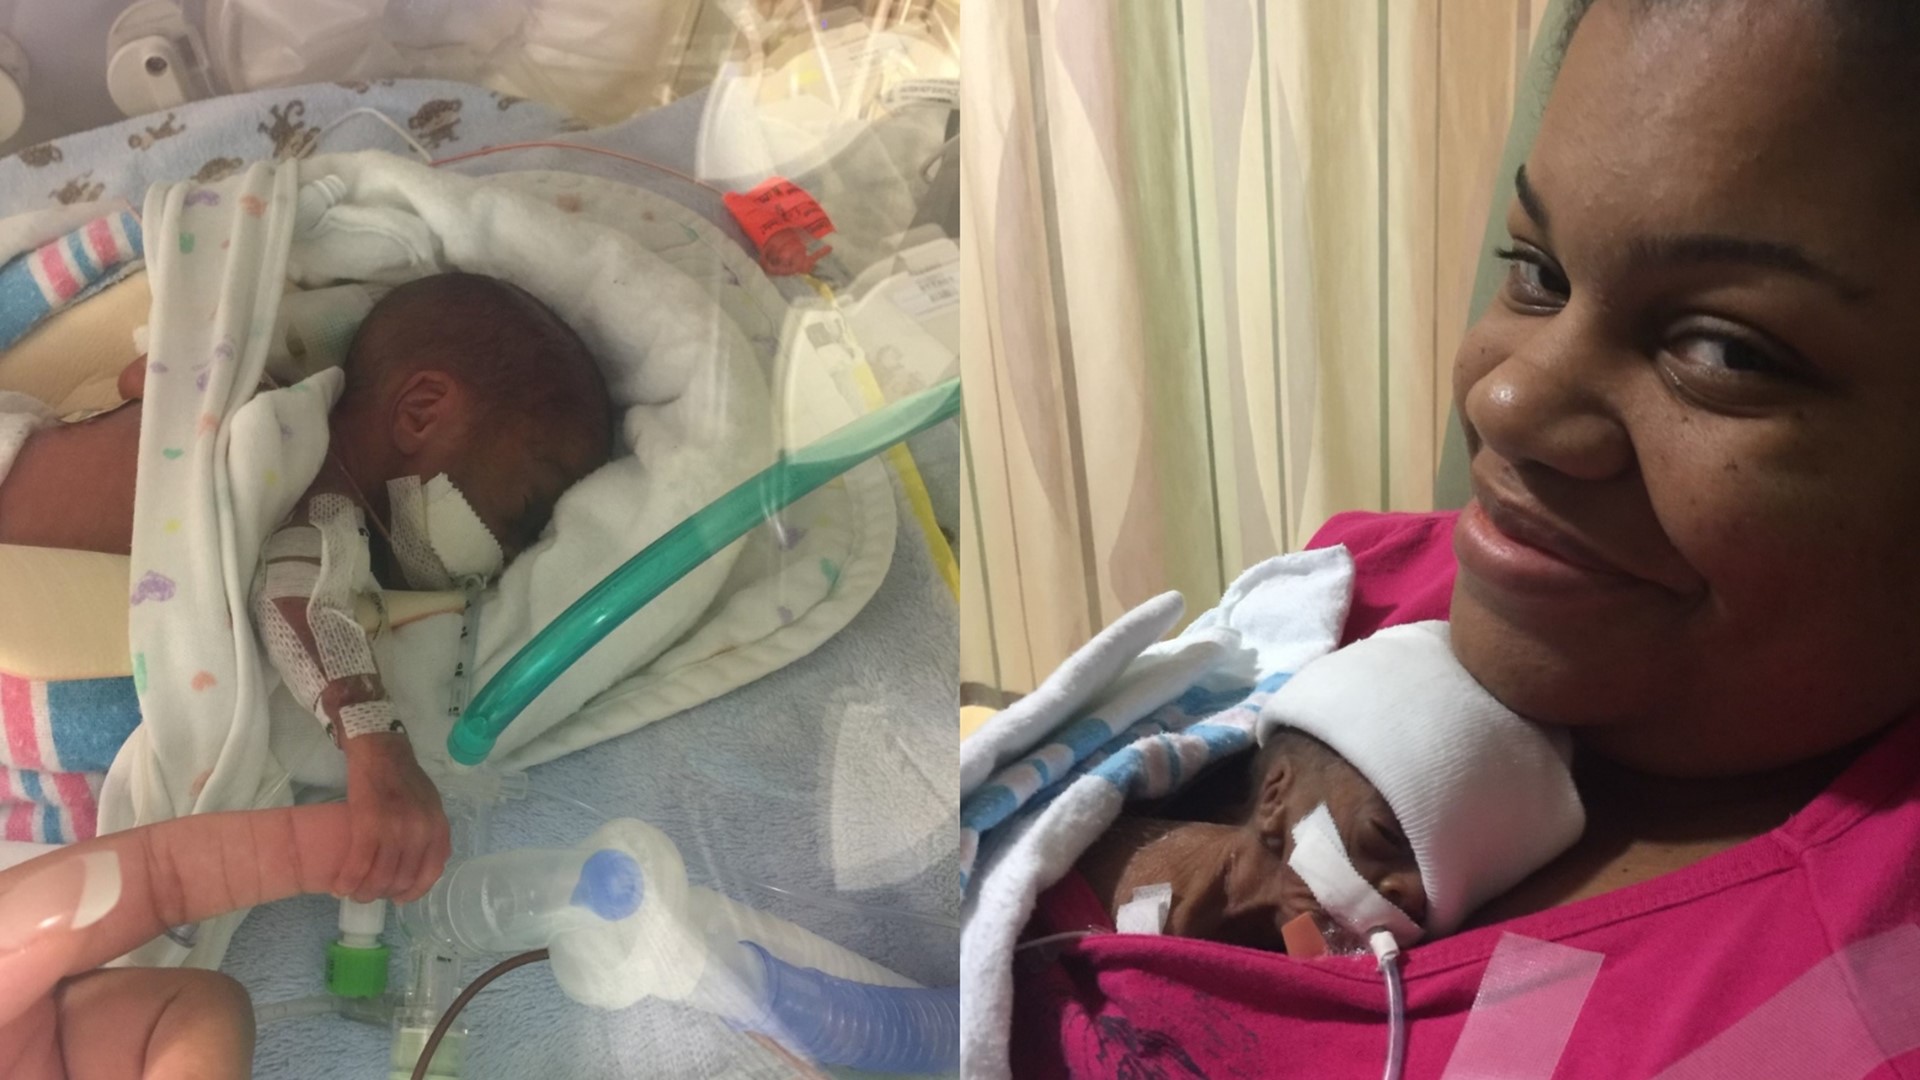 High Point micro-preemie Amari Jones spent 120 days in the NICU at Novant Health Forsyth Medical Center. He weighed only 15 ounces, roughly the size of a smartphone.